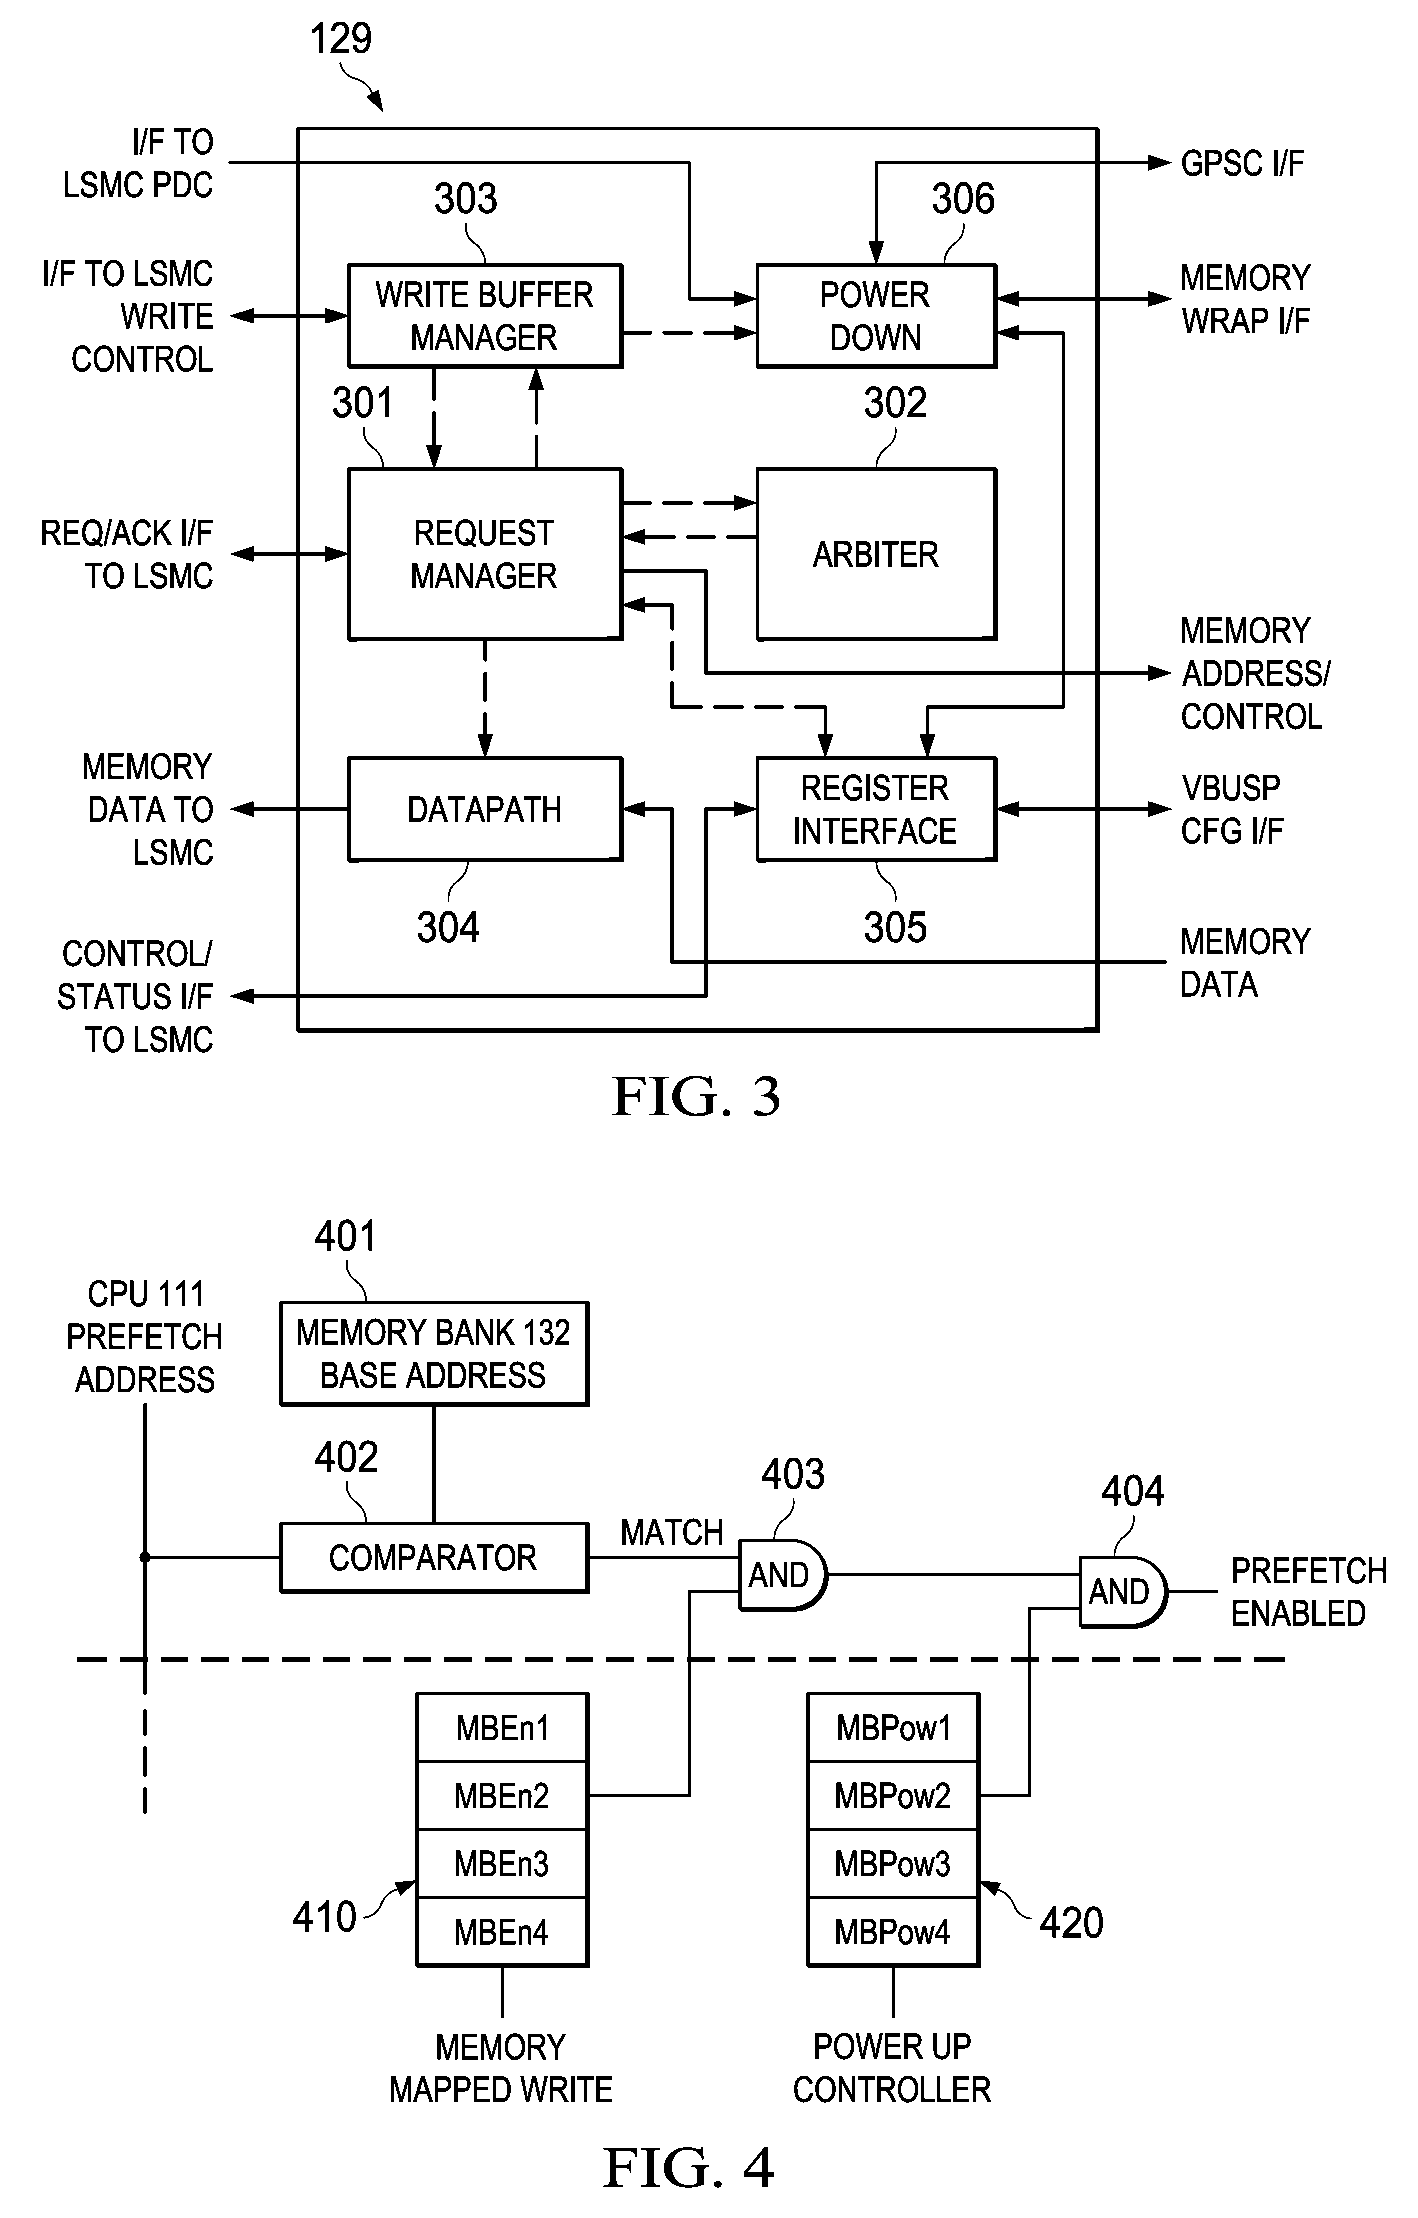 Prefetch Termination at Powered Down Memory Bank Boundary in Shared Memory Controller